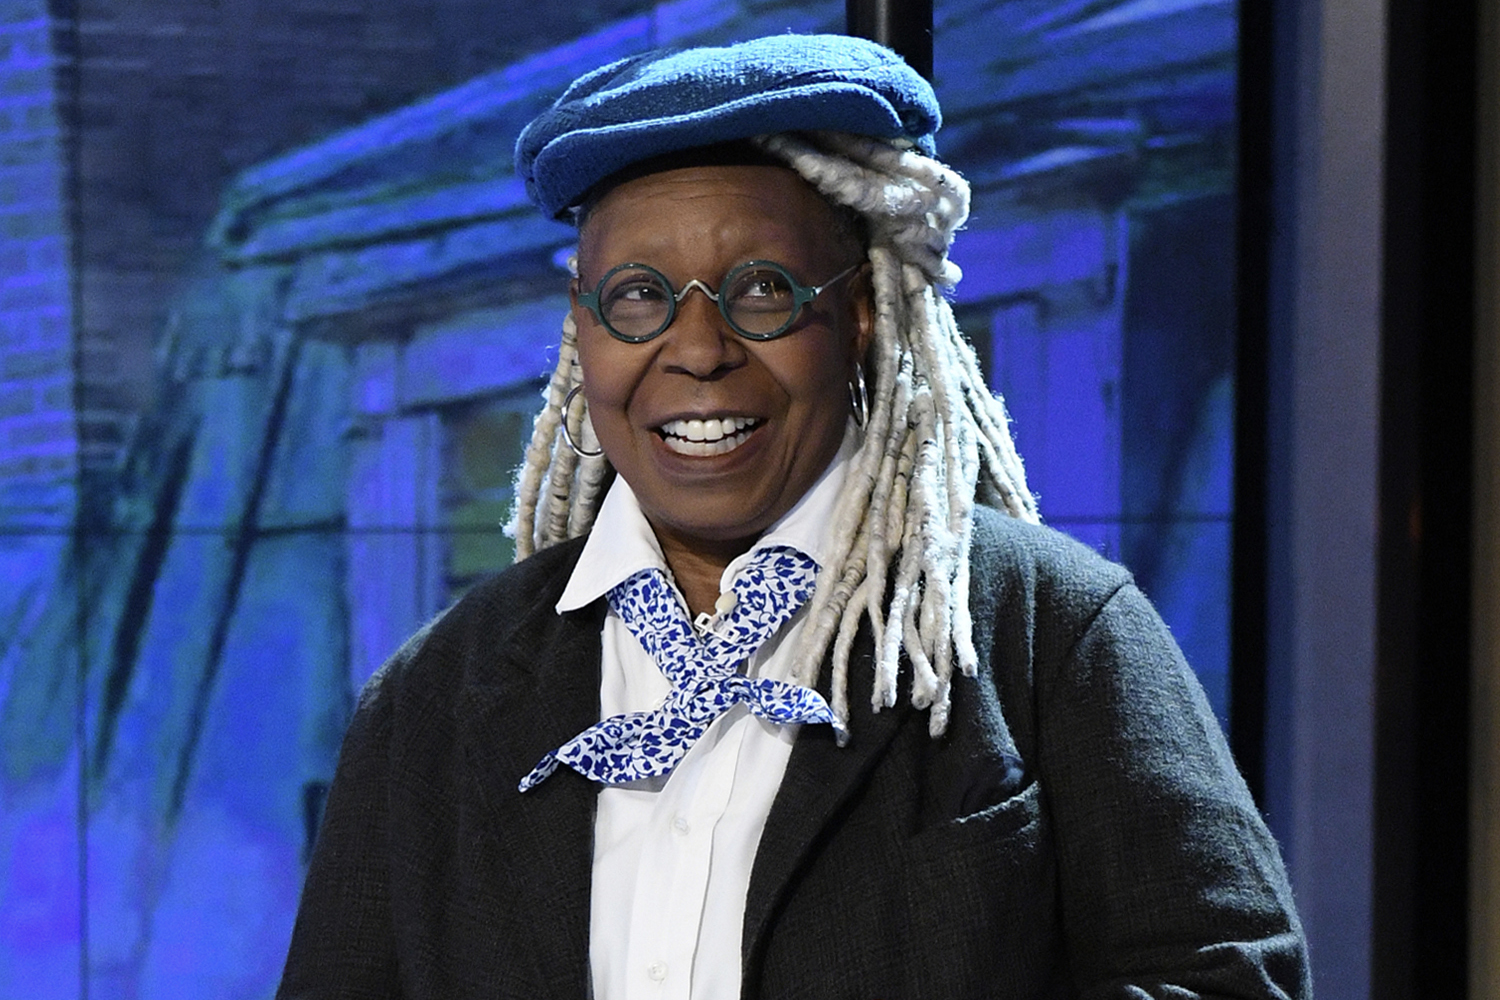 Whoopi Goldberg smiling and wearing a blue beret